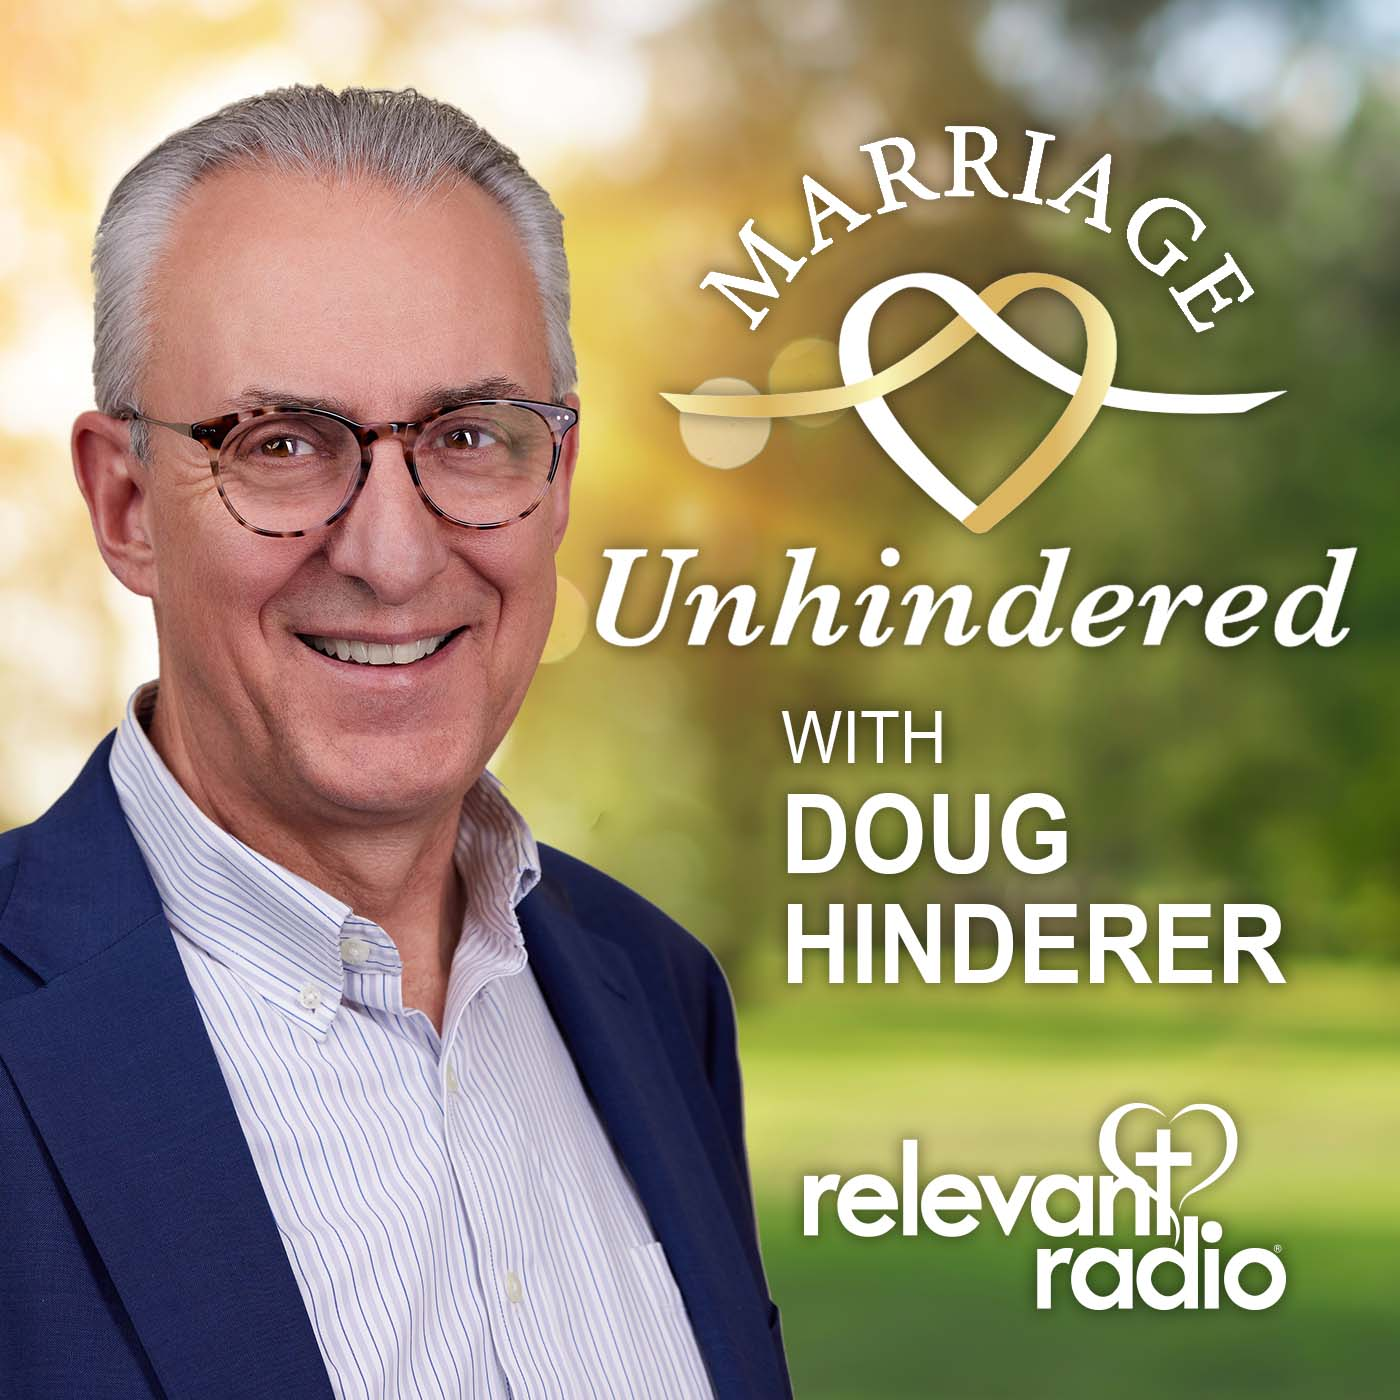 Marriage Unhindered